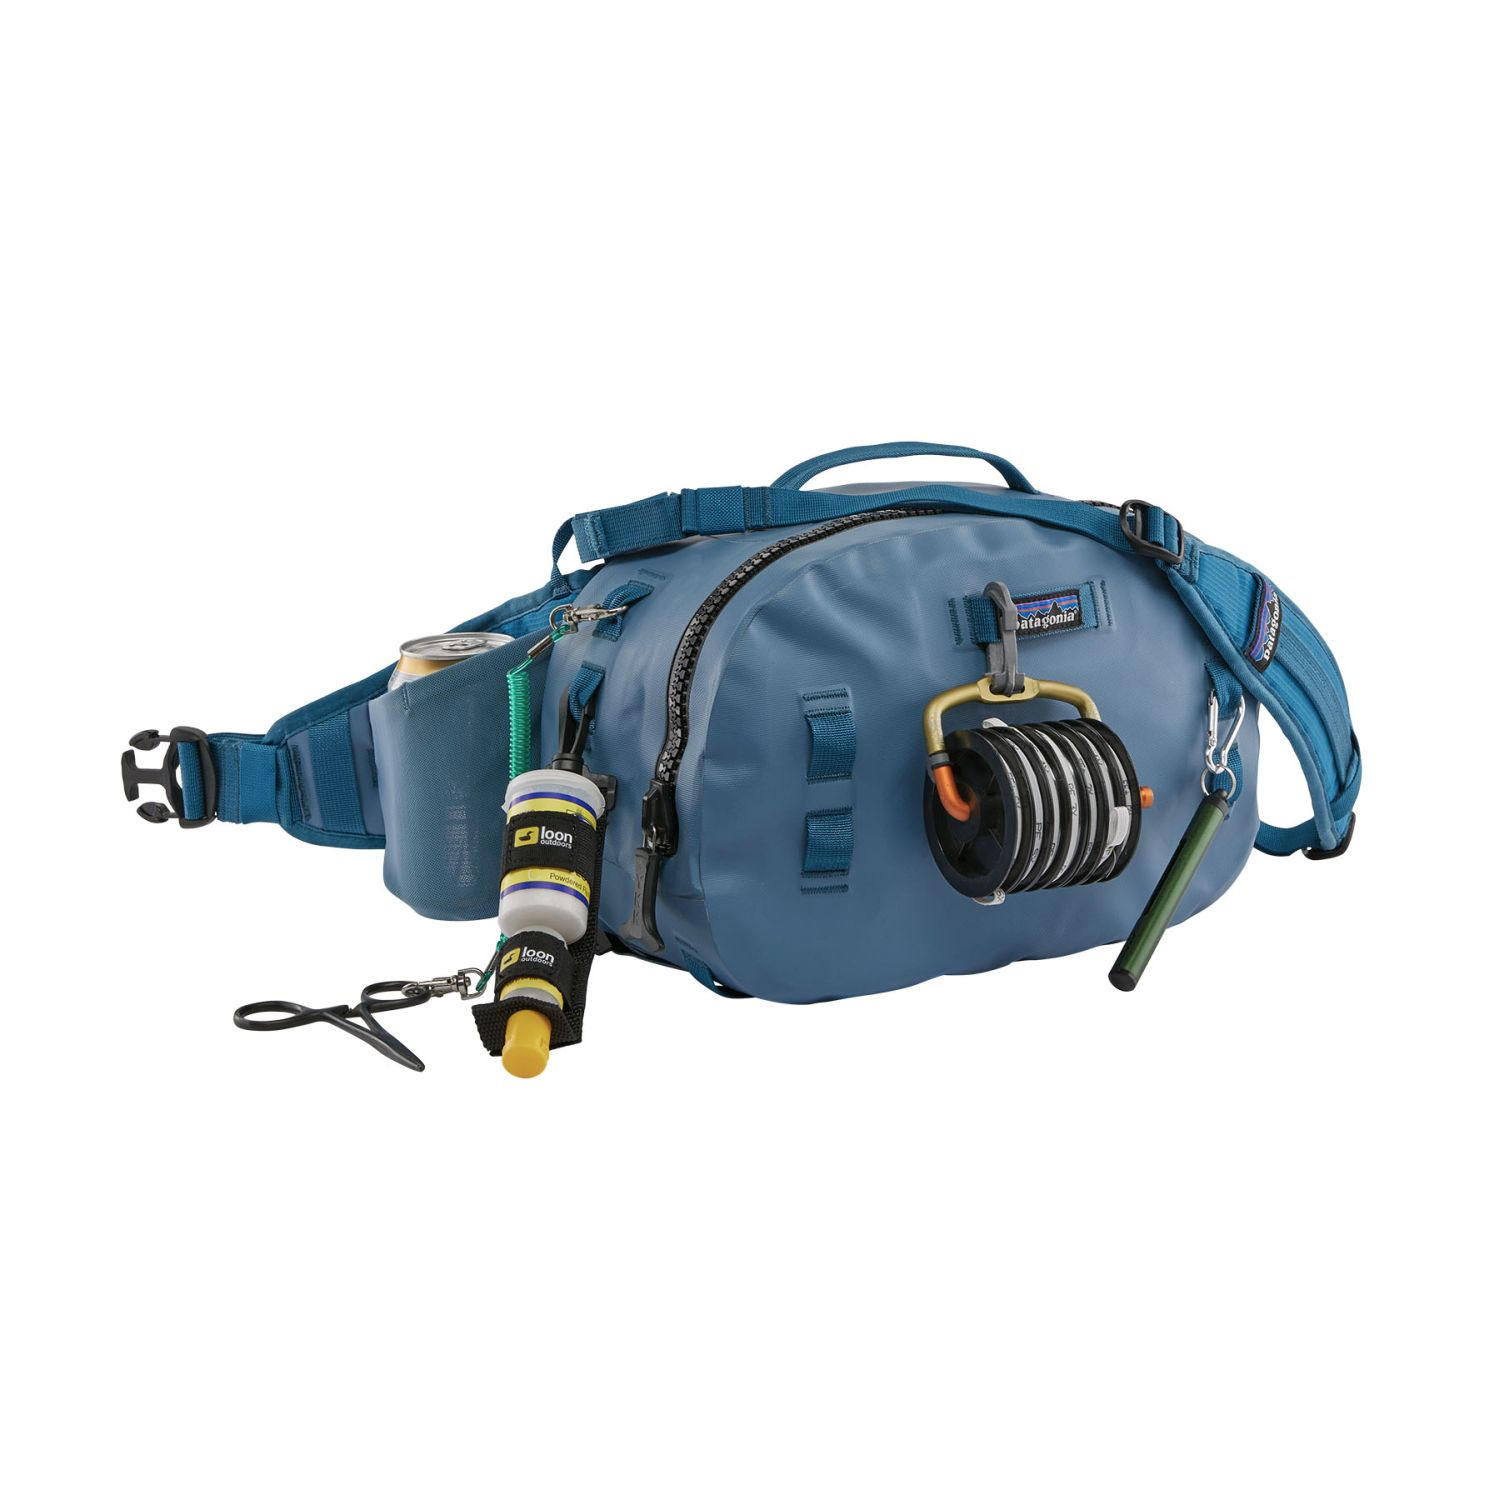 Guidewater Hip Pack 9L (pigeon blue)